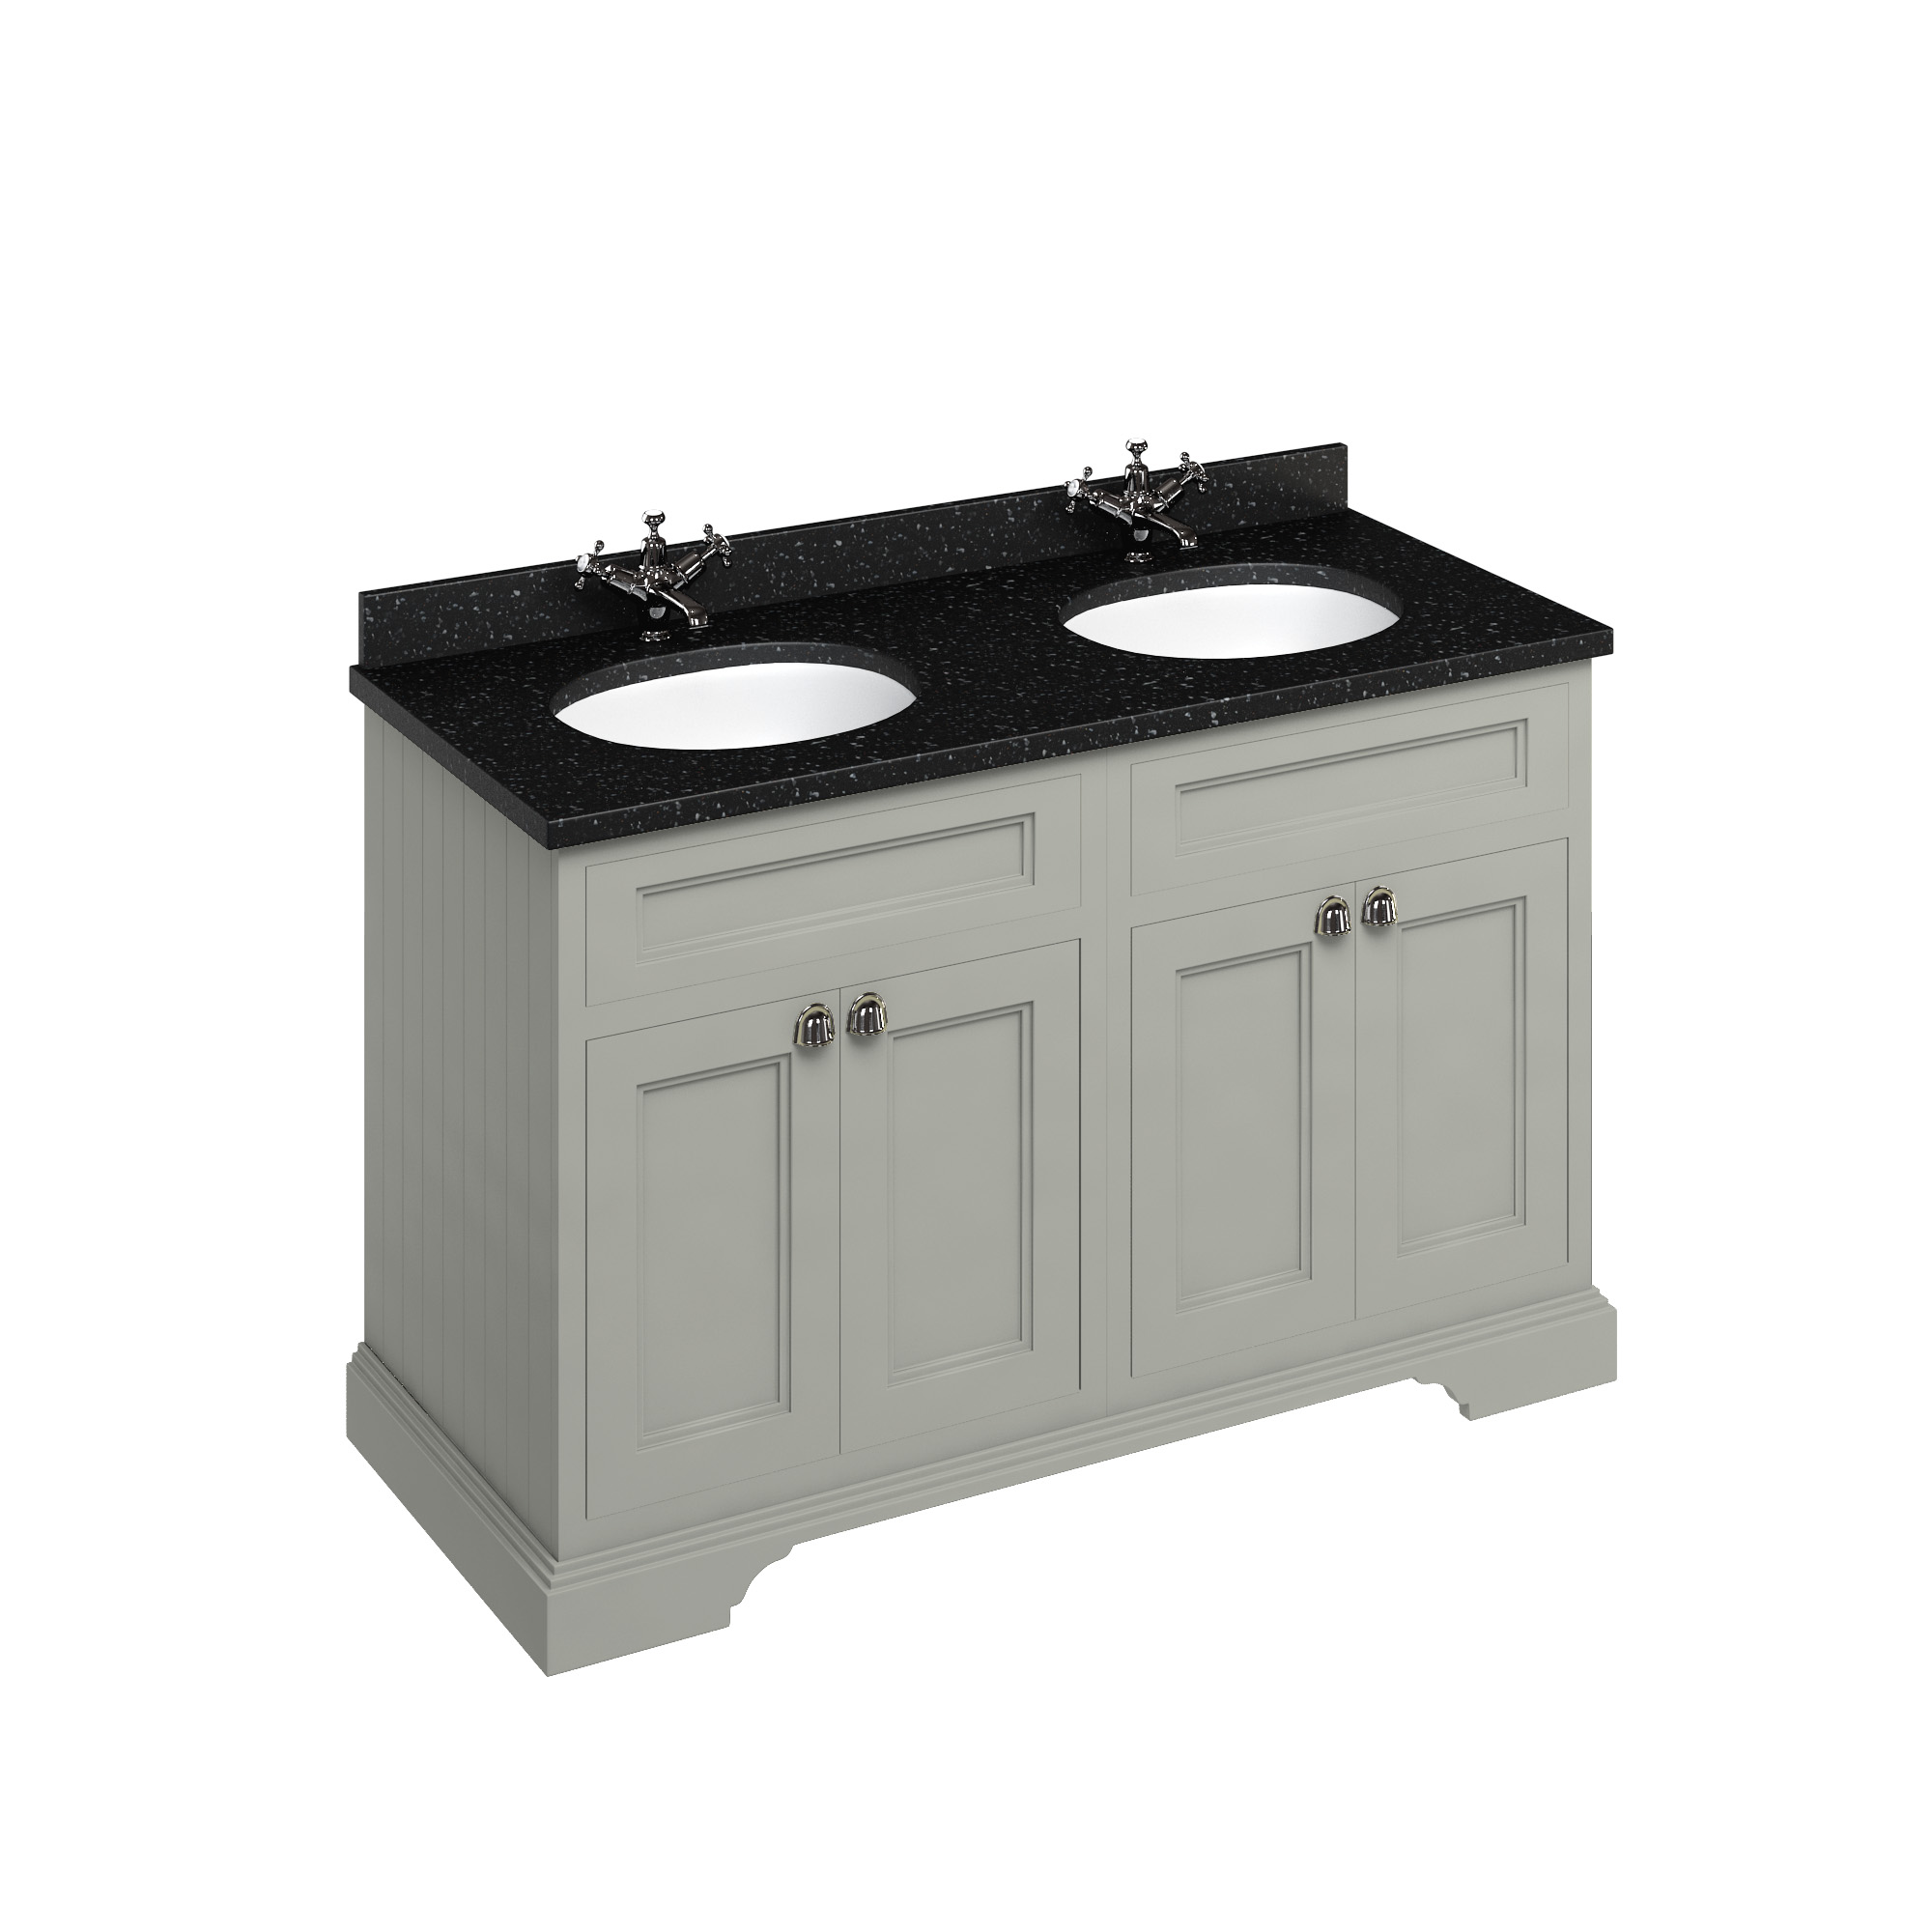 Freestanding 130 Vanity Unit with doors - Dark Olive and Minerva black granite worktop with two integrated white basins